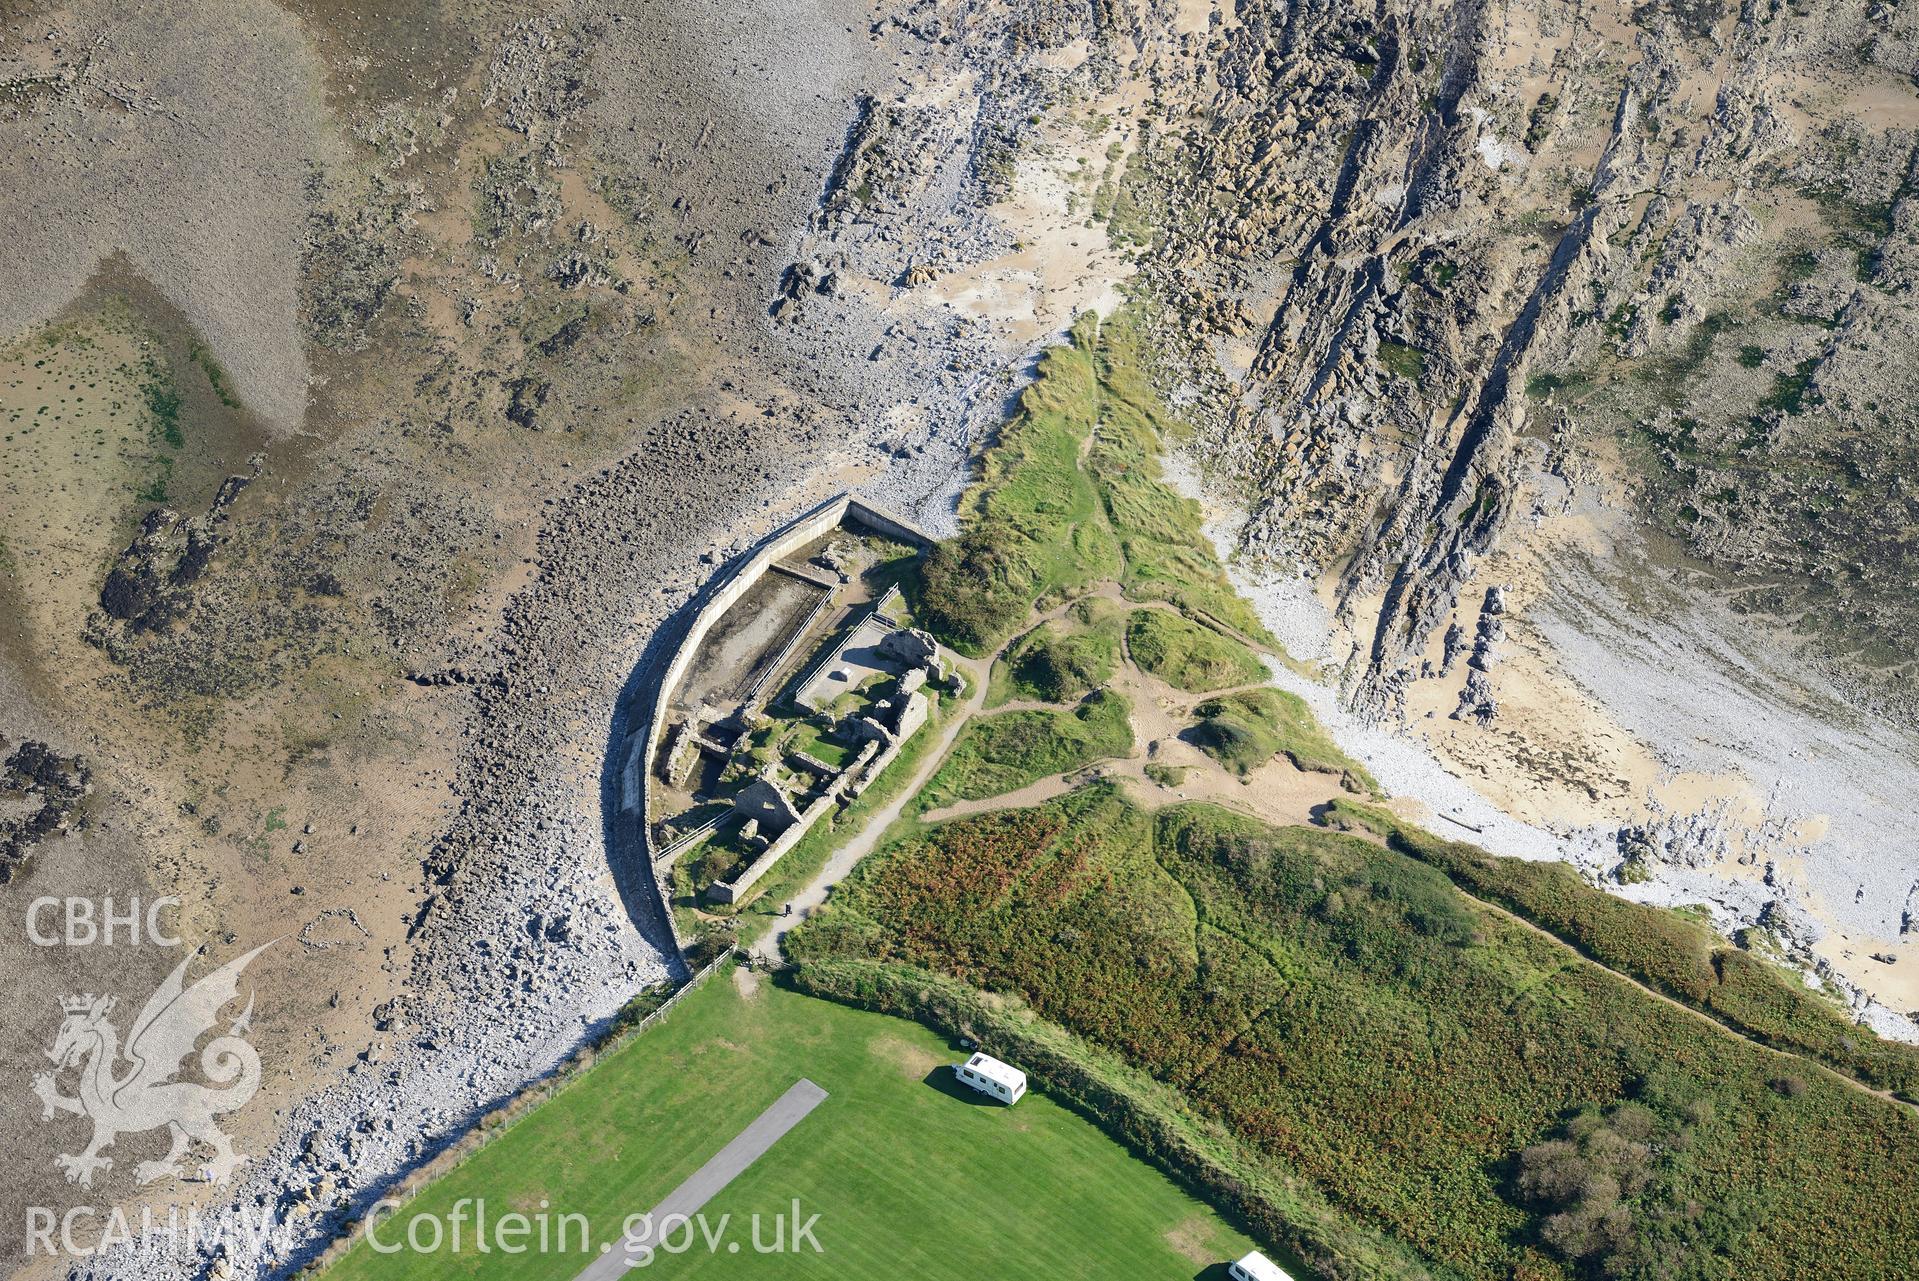 Port Eynon salt house, on the southern shores of the Gower Peninsula at Port Eynon Bay. Oblique aerial photograph taken during the Royal Commission's programme of archaeological aerial reconnaissance by Toby Driver on 30th September 2015.